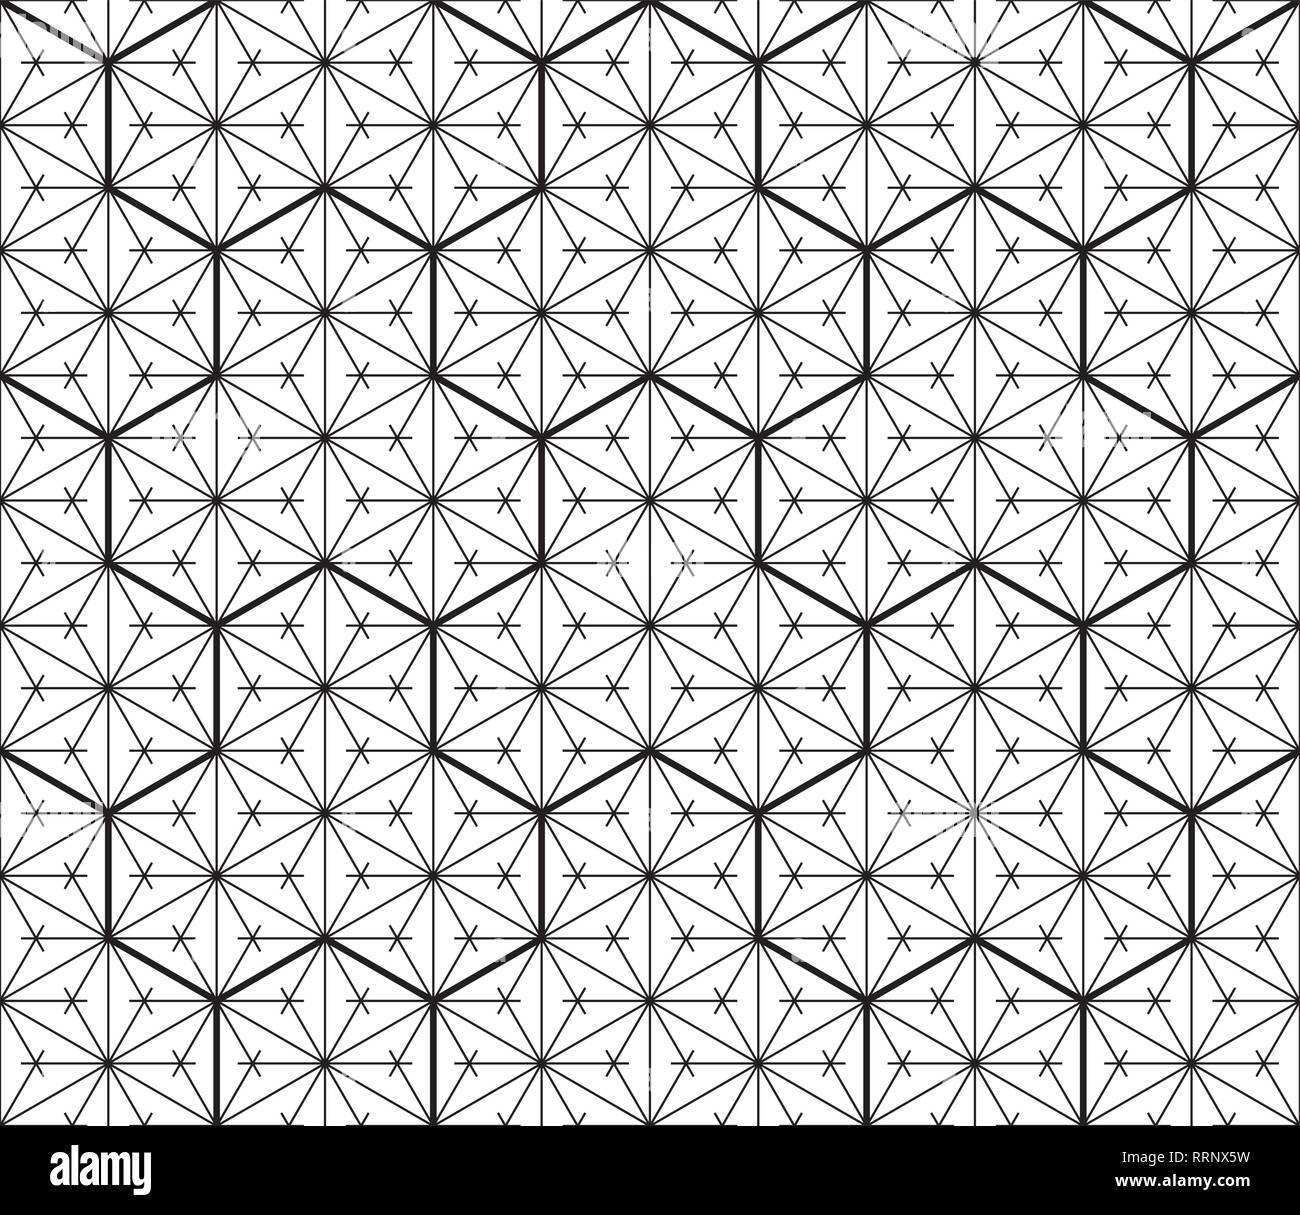 https://c8.alamy.com/comp/RRNX5W/japanese-seamless-geometric-pattern-black-and-white-silhouette-with-average-and-fine-linesfor-design-templatetextilefabricwrapping-paperlaser-cu-RRNX5W.jpg